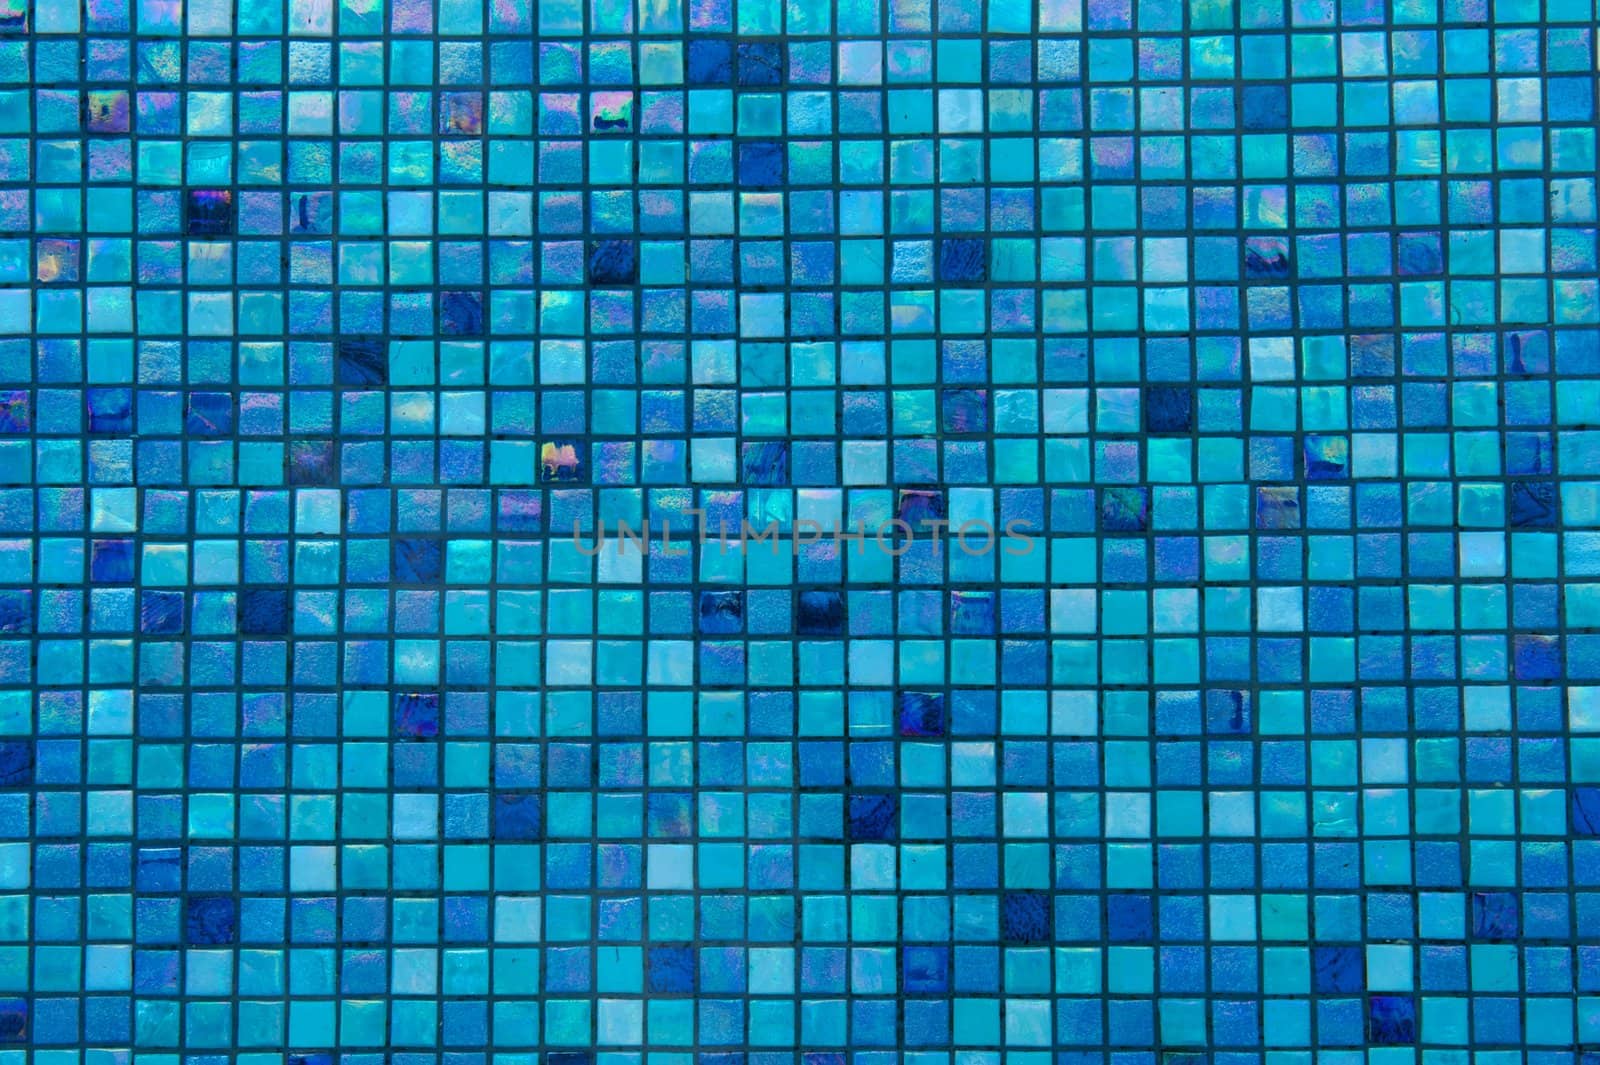 Blue Tiles on Pool Bottom in Rows by pixelsnap